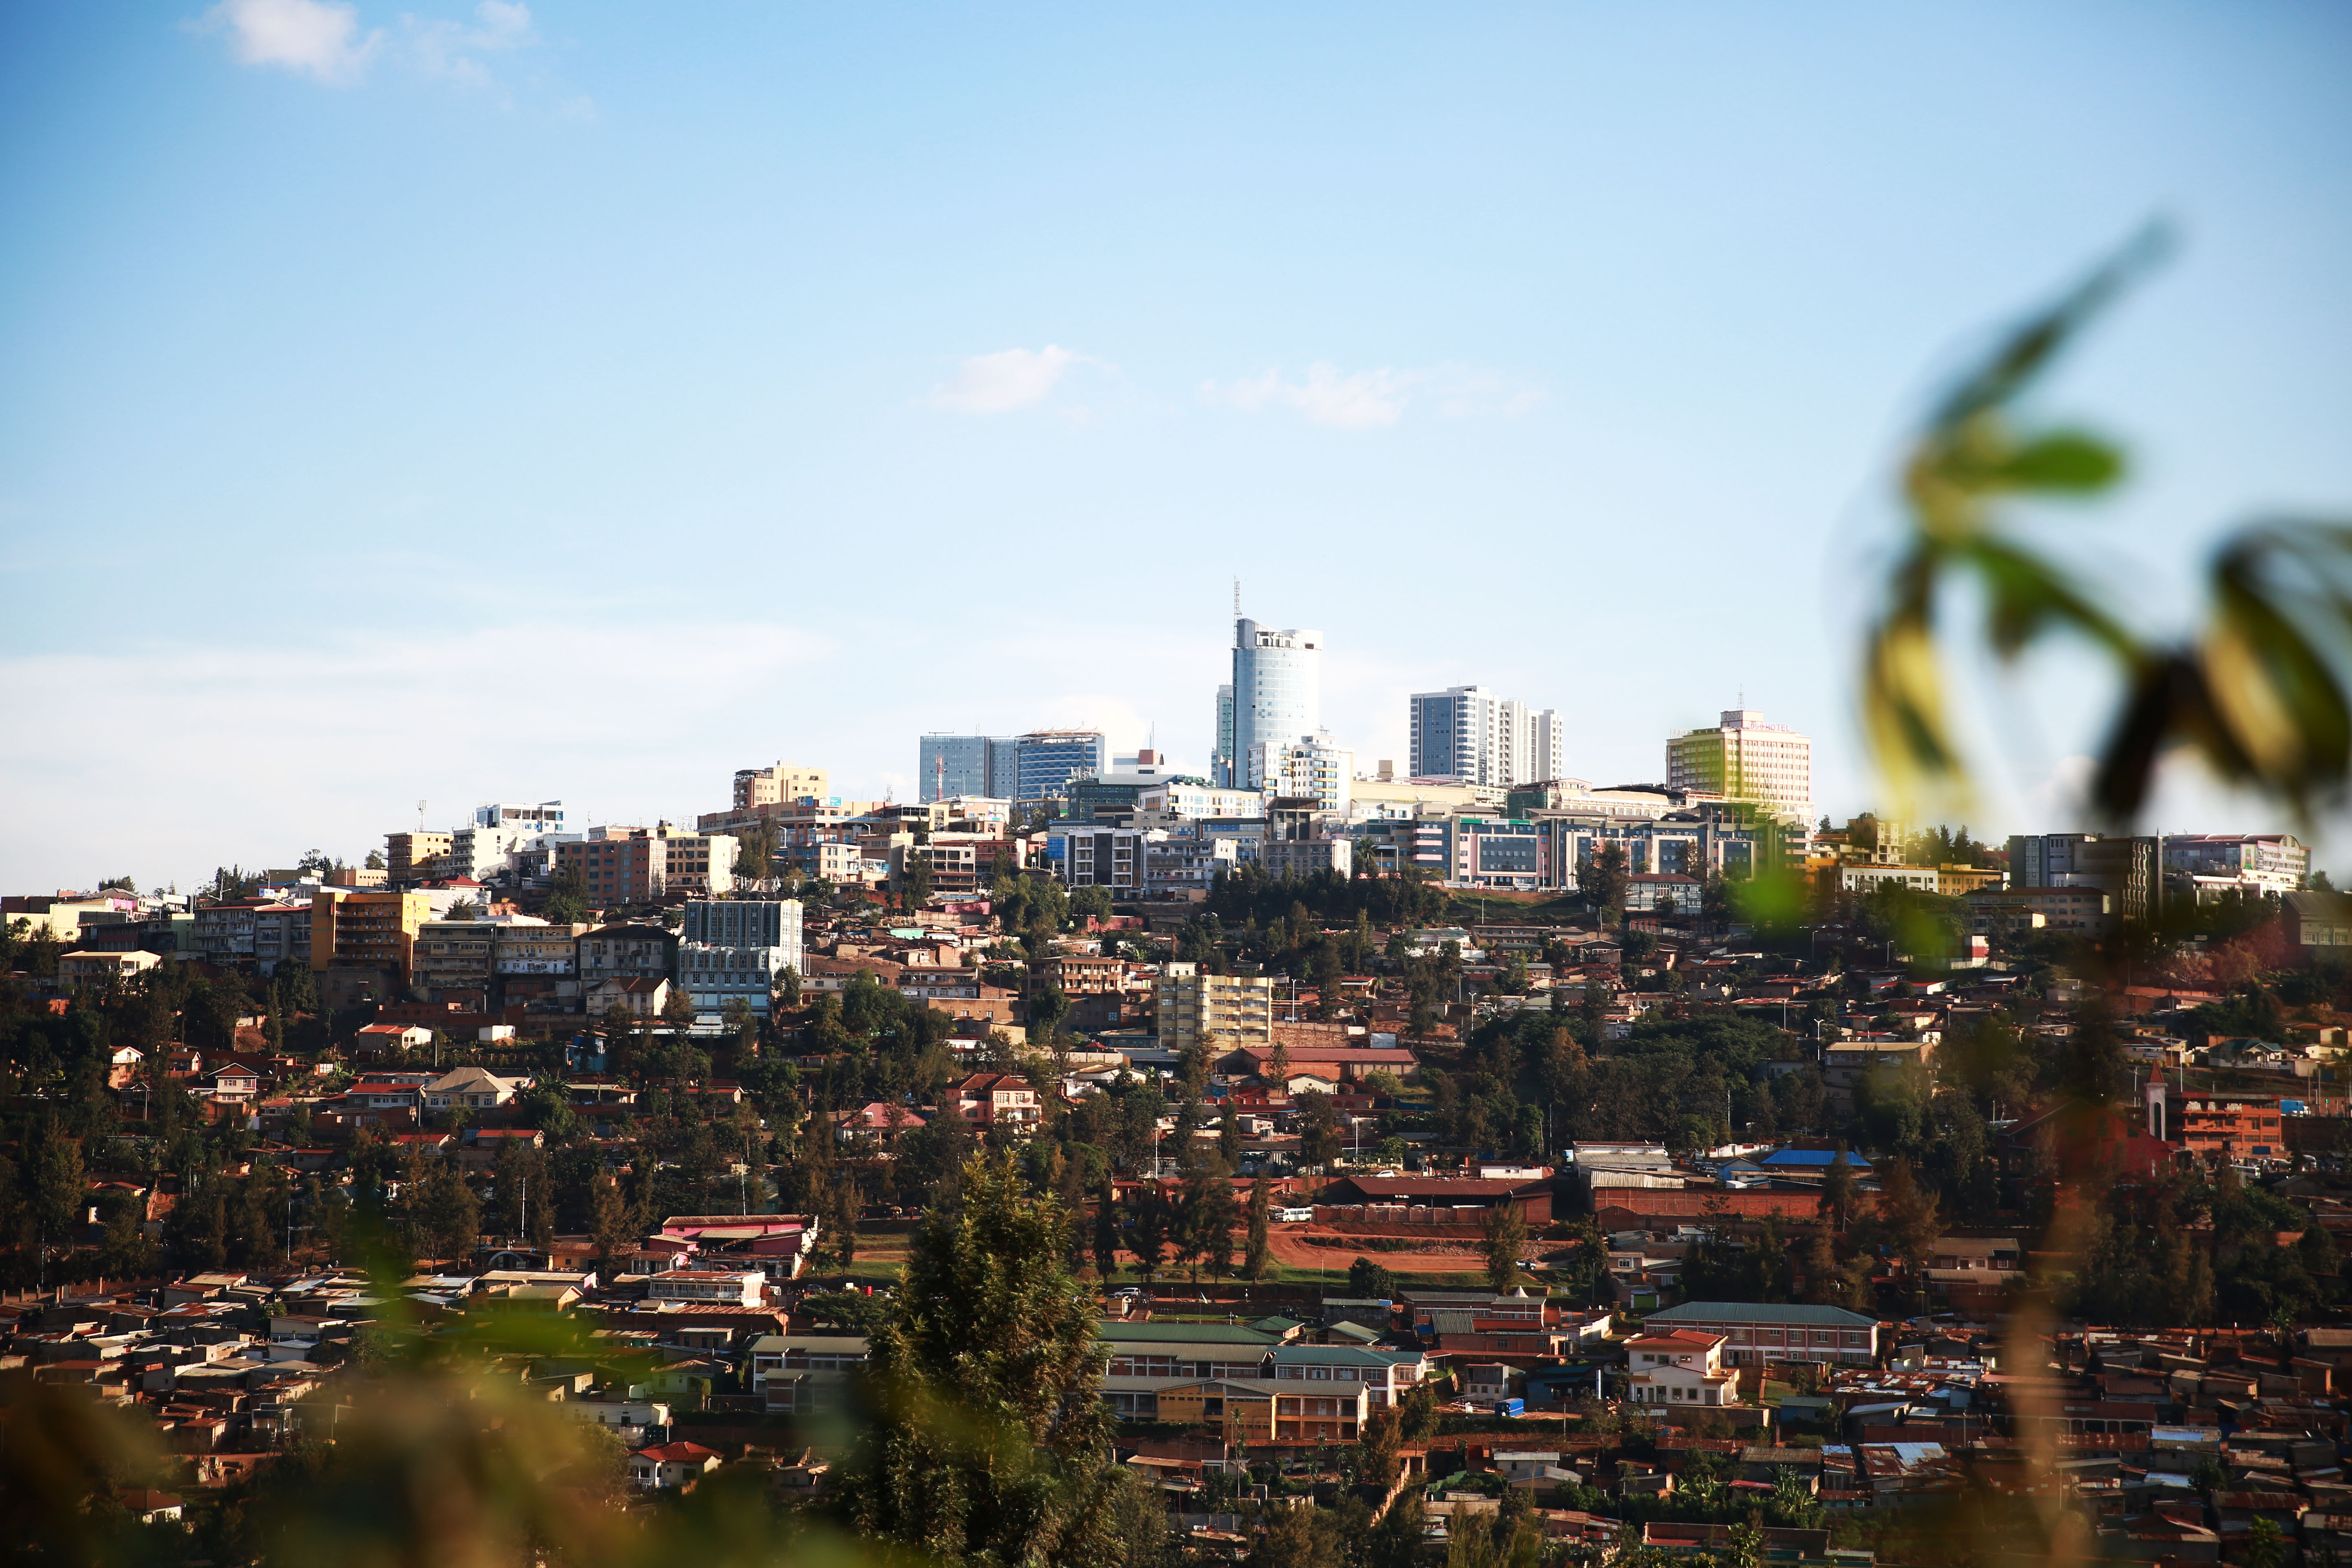 A view of Kigali city .The government had repossessed over 1.4 million plots of land countrywide until  December 31, 2020, Sam Ngendahimana